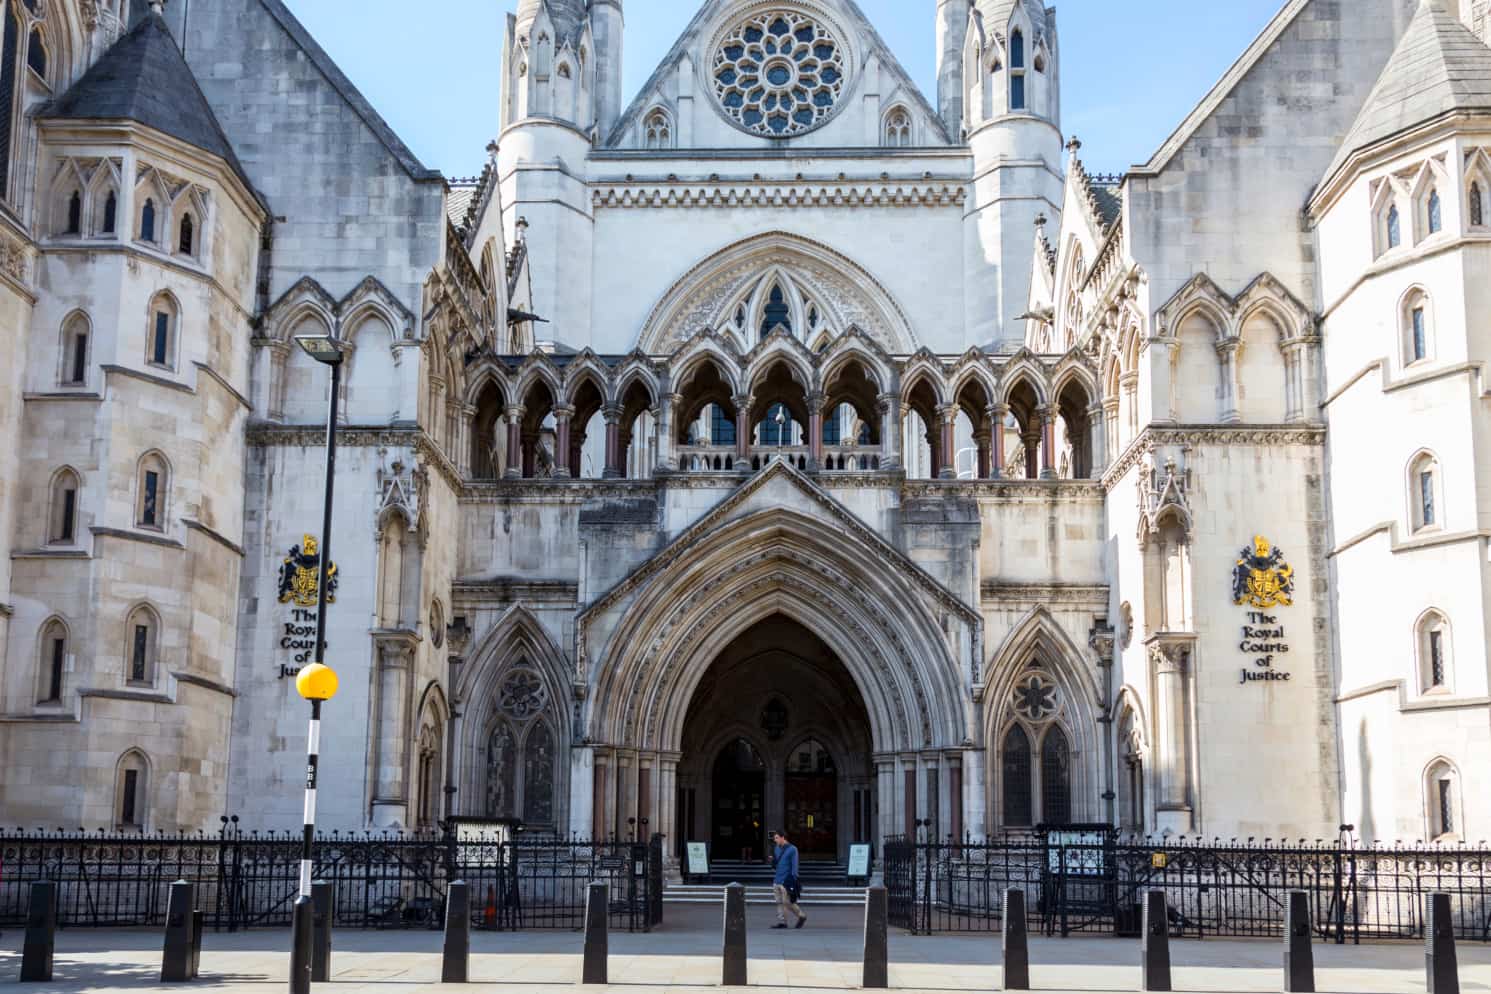 The main entrance to the Royal Courts of Justice, in Westminster, London